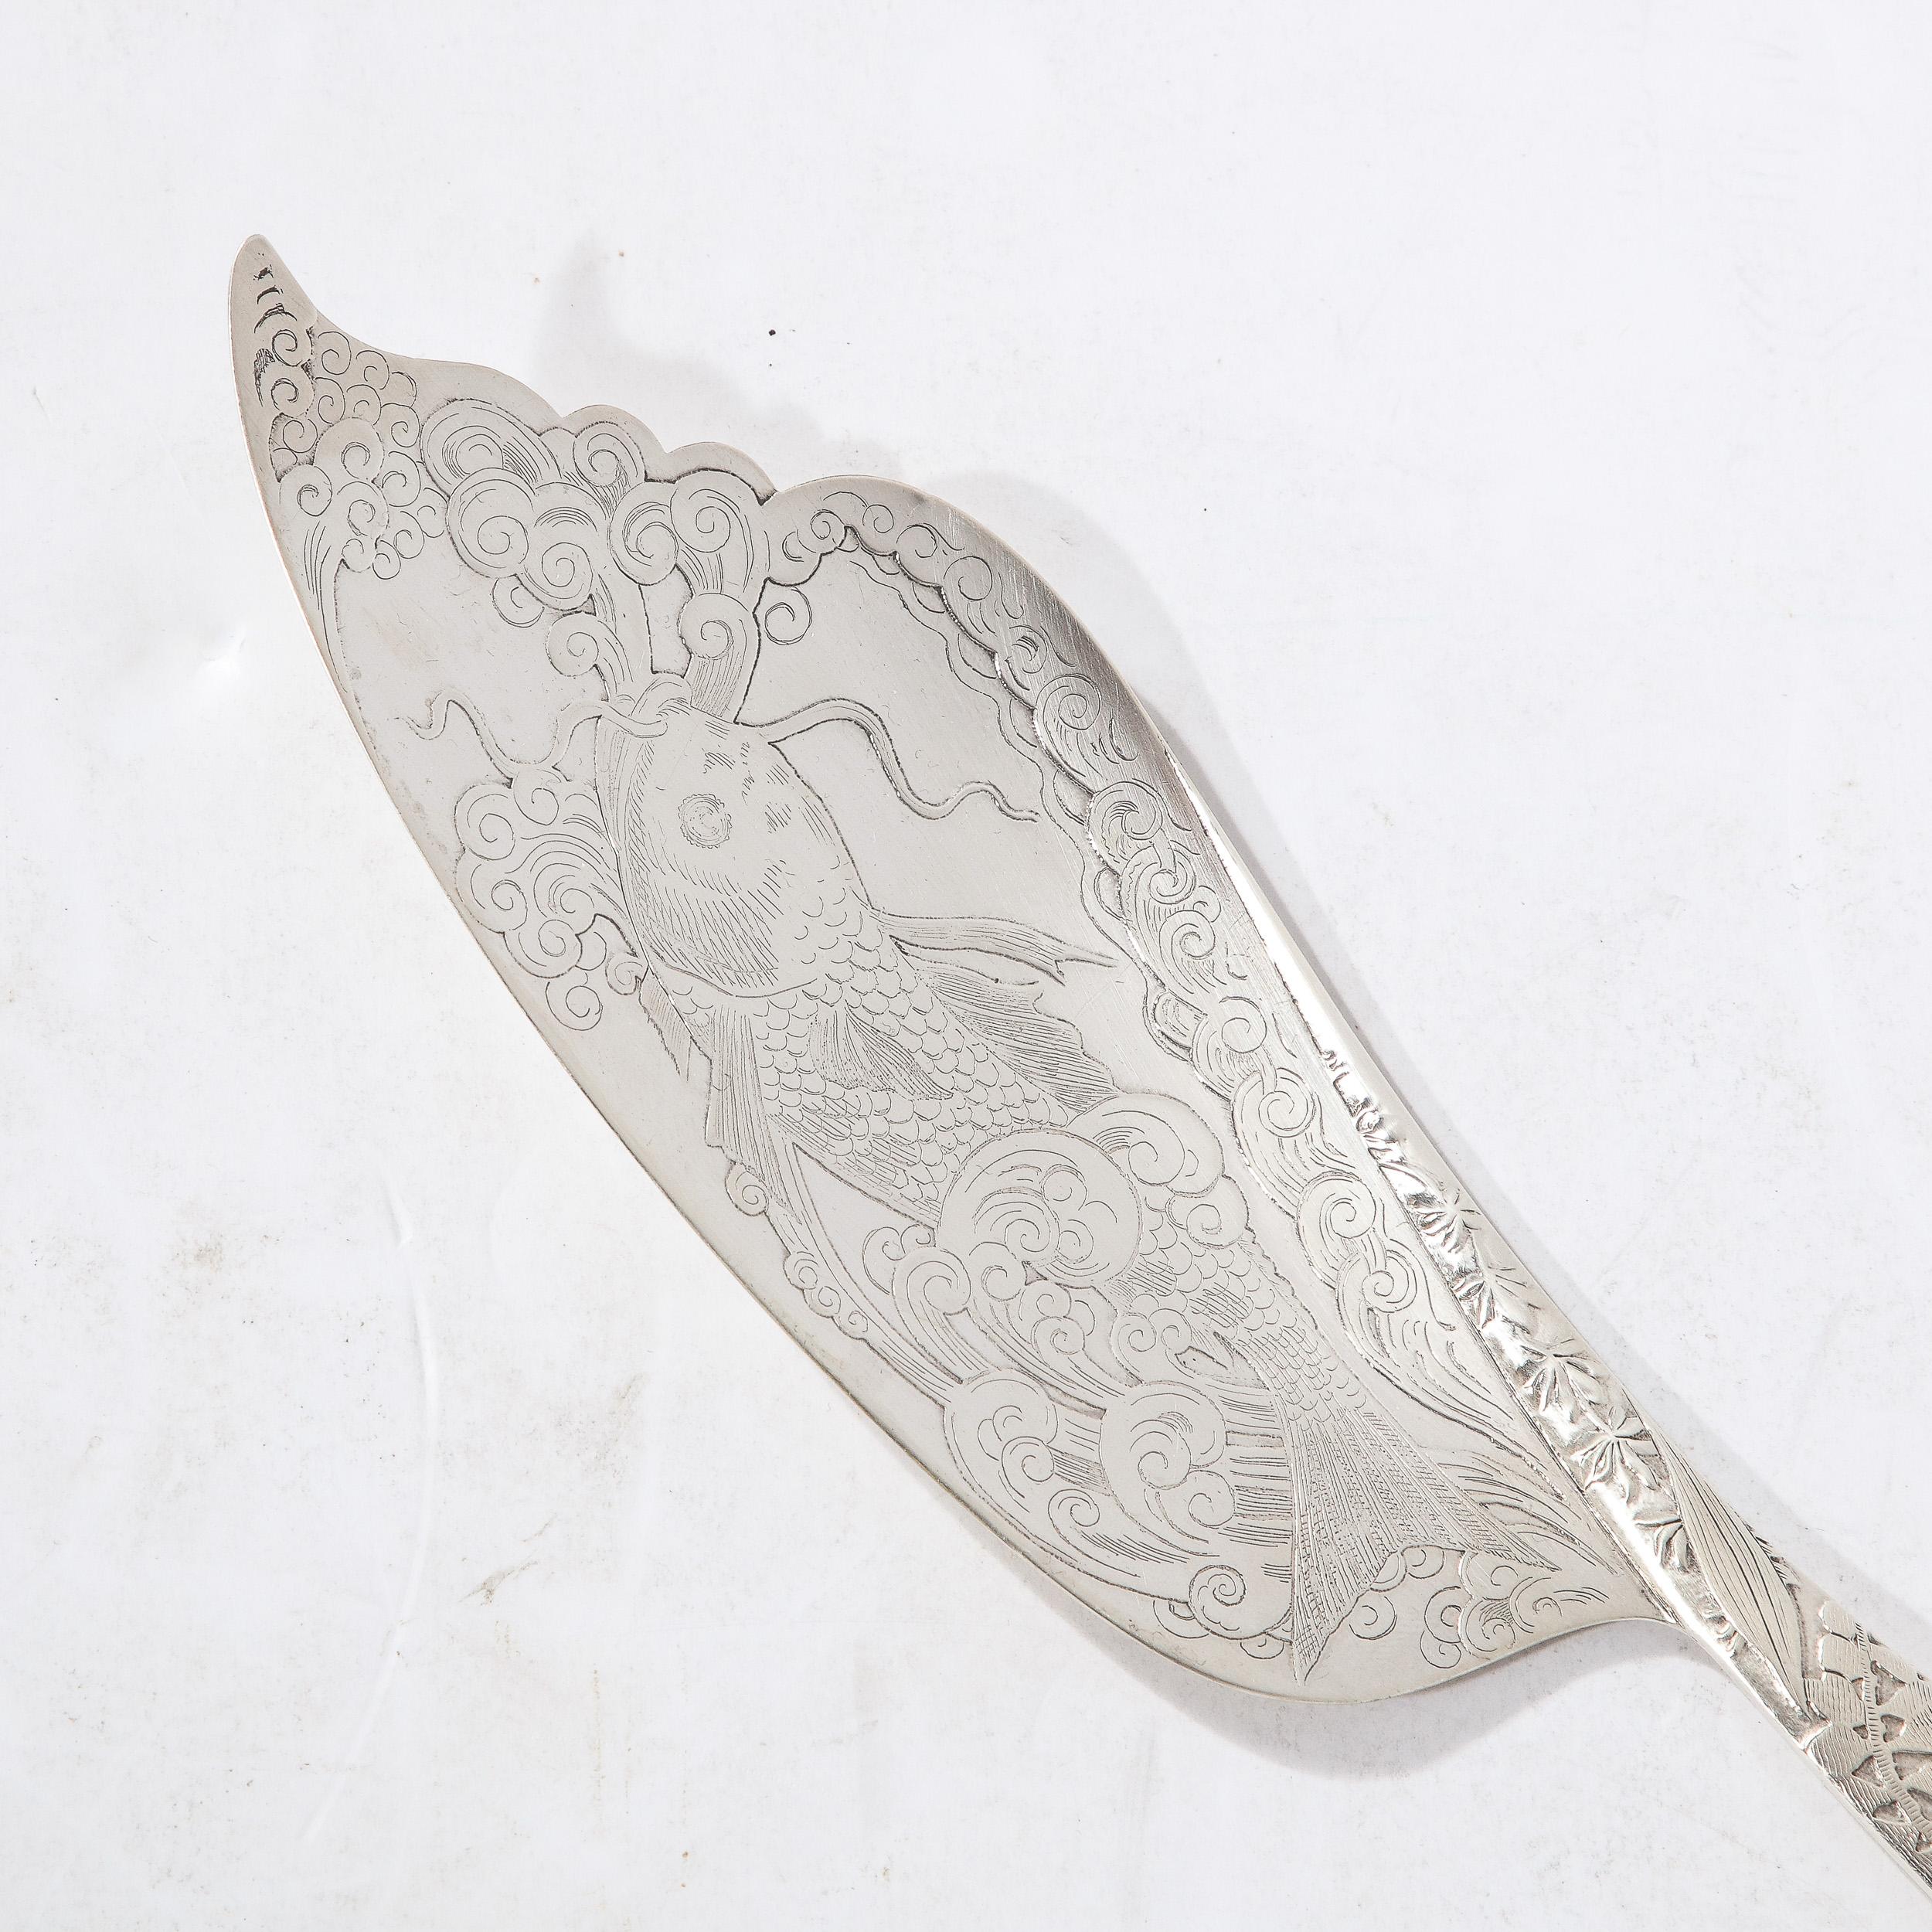 This elegant and well adorned Sterling Silver Fish Slice W/Acid Etched & Hand Tooled Detailing is crafted by the Whiting Manufacturing Company and originates from the United States, Circa 1890. This piece features a minimal profile of elegant